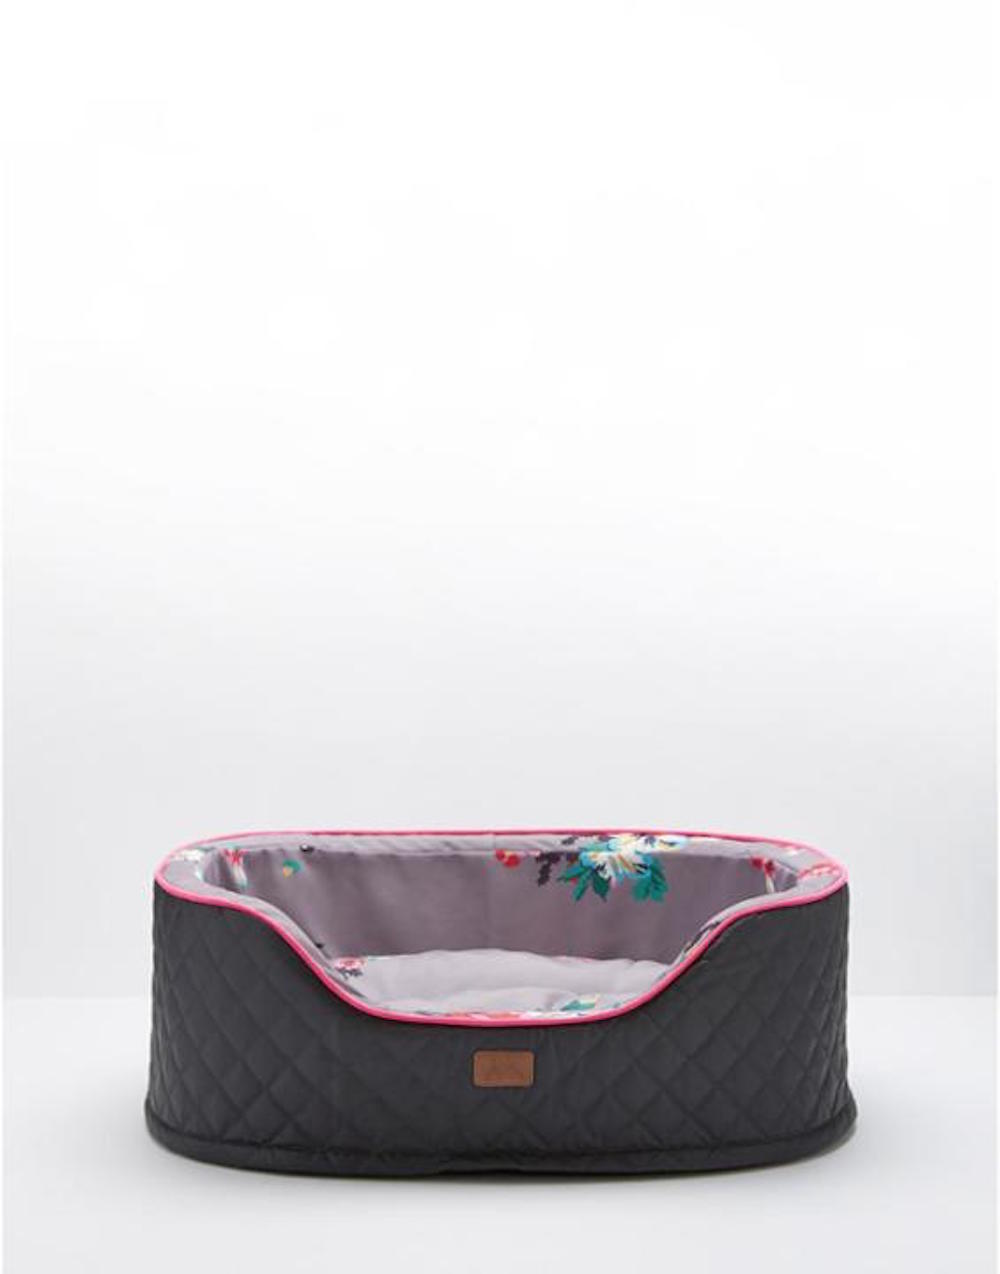 Joules Dog Bed